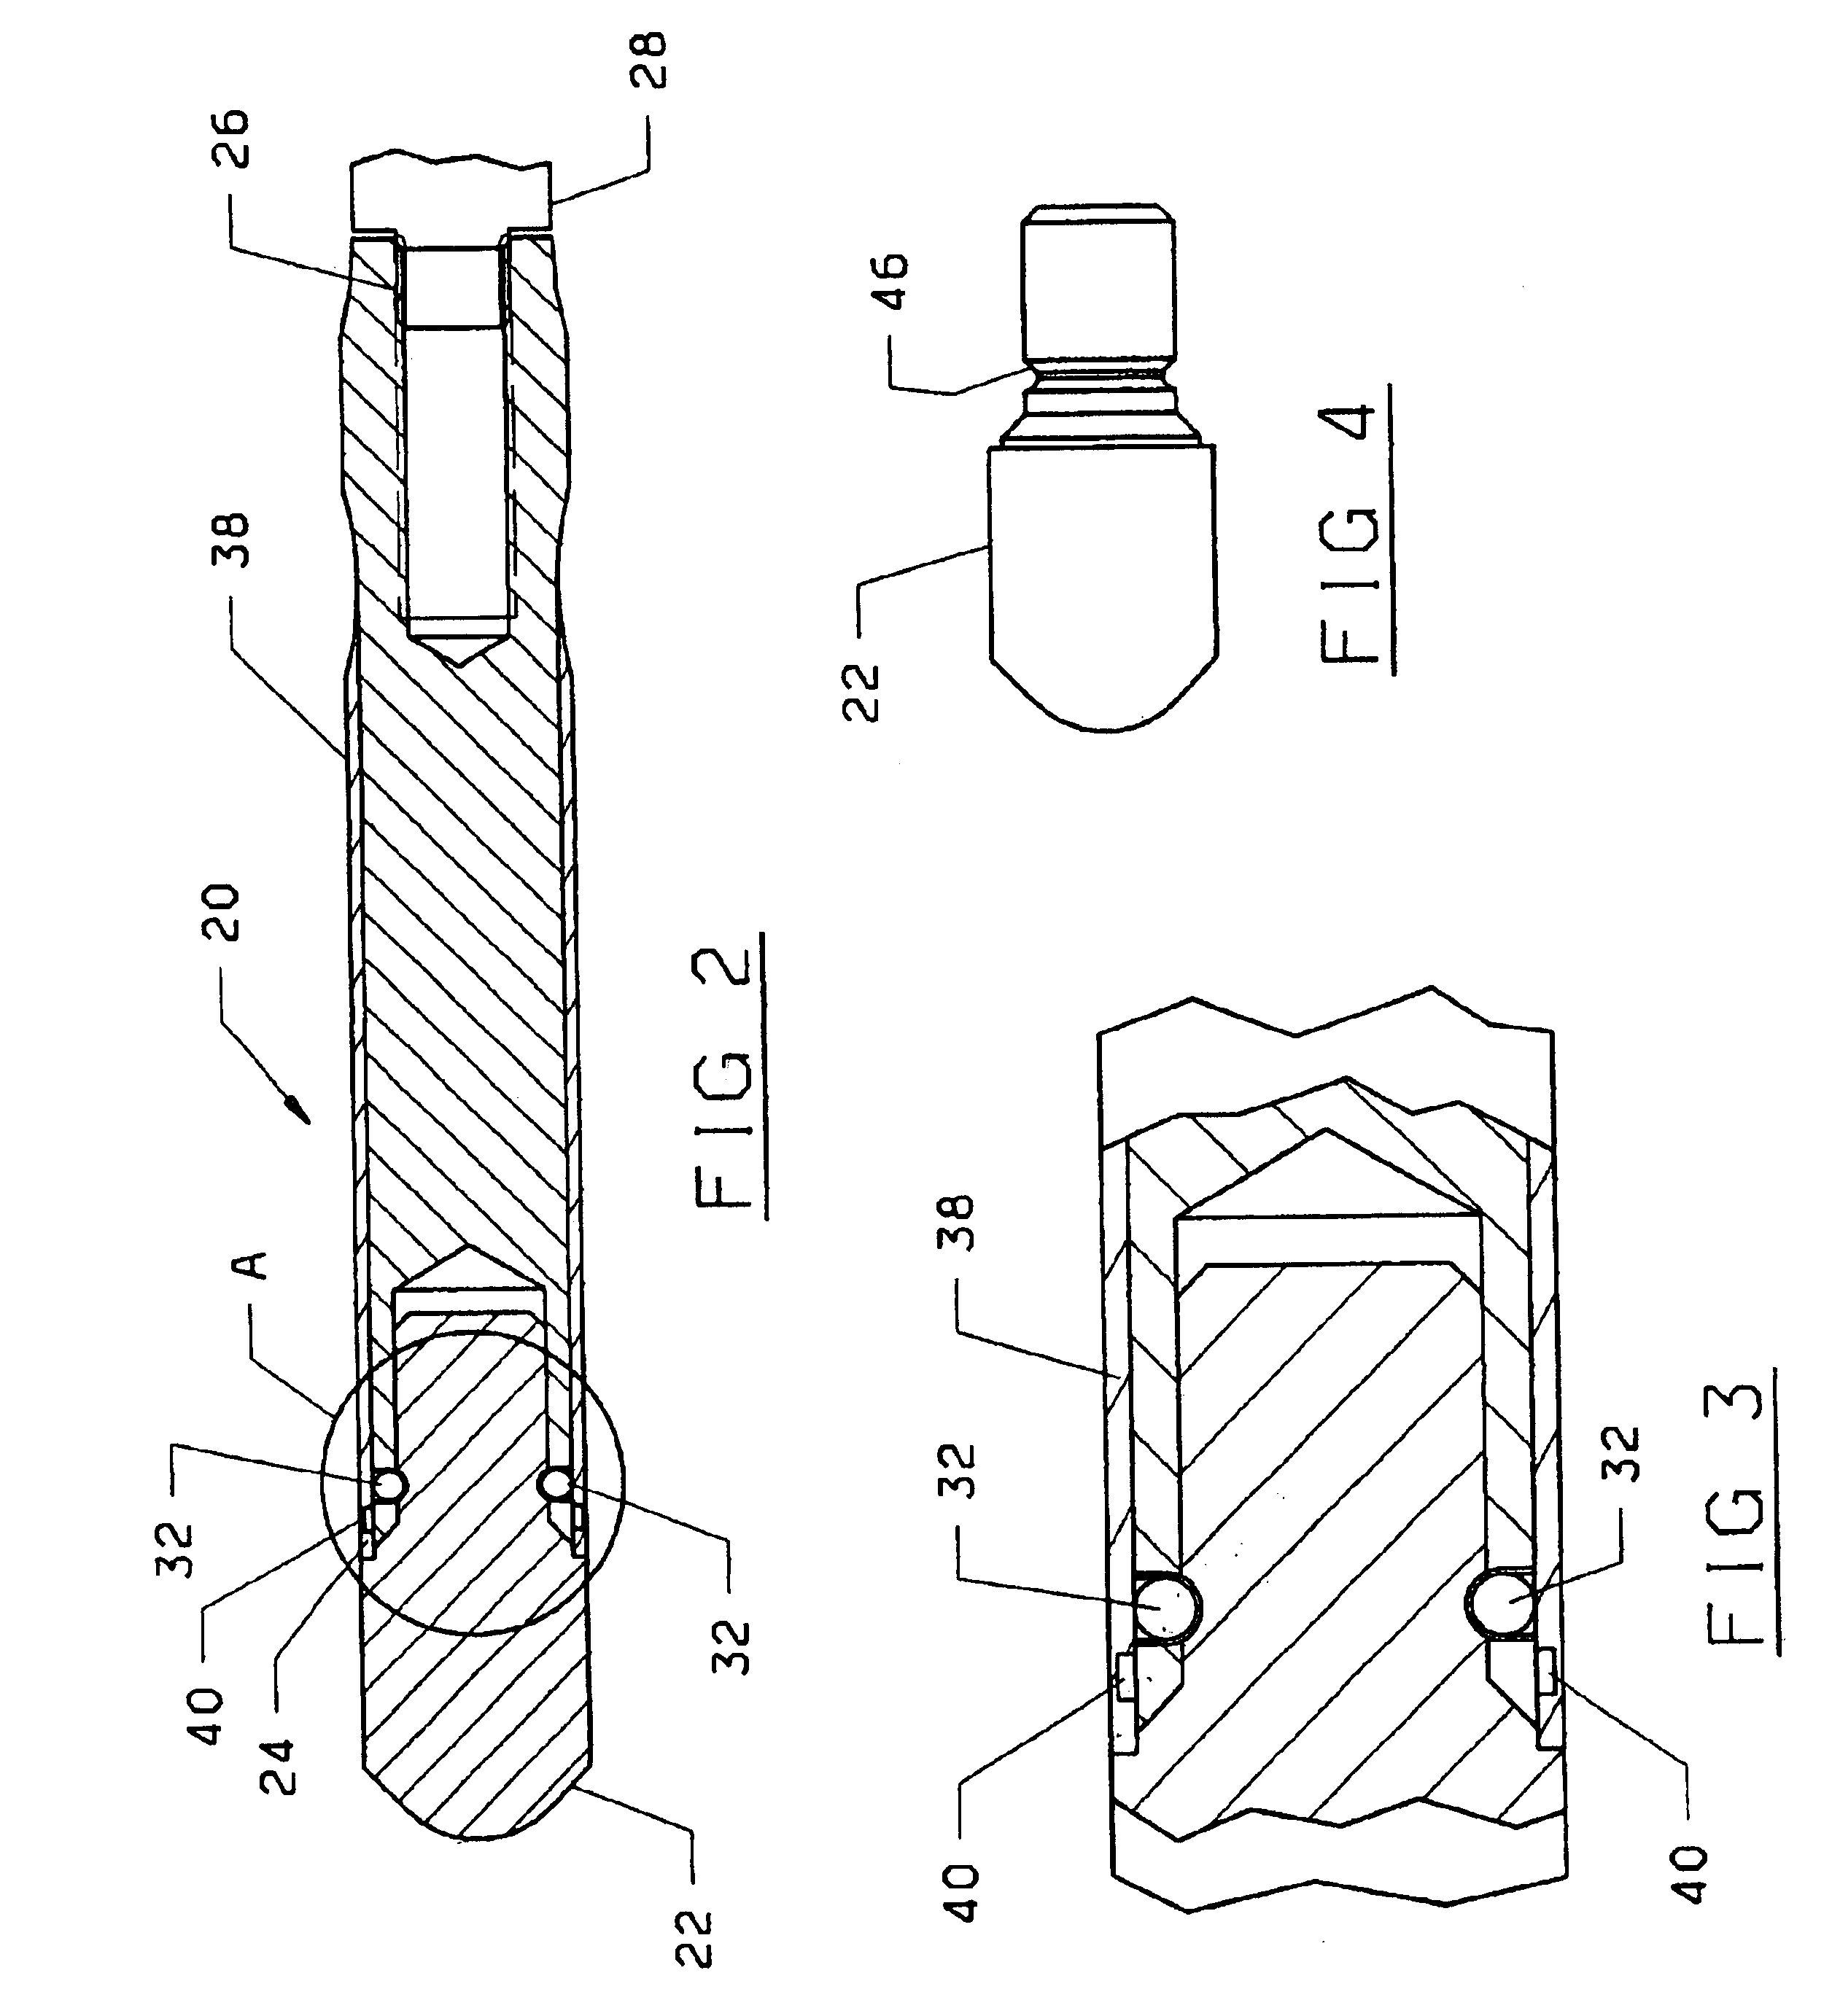 Smooth collet for pulling fuel rods